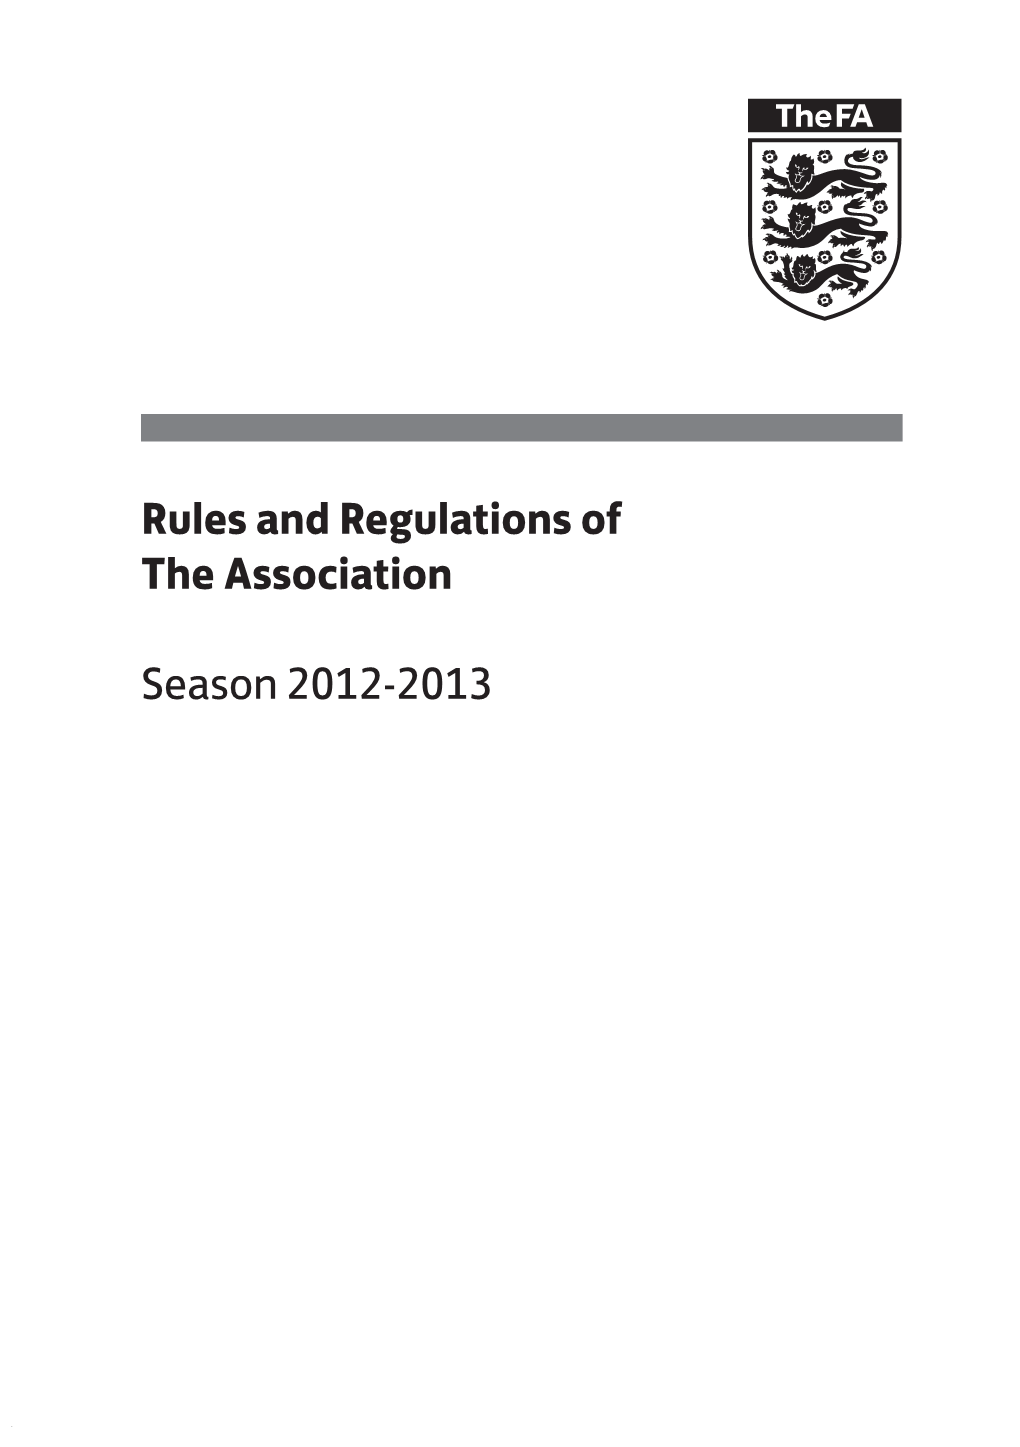 Football Association's Rules and Regulations